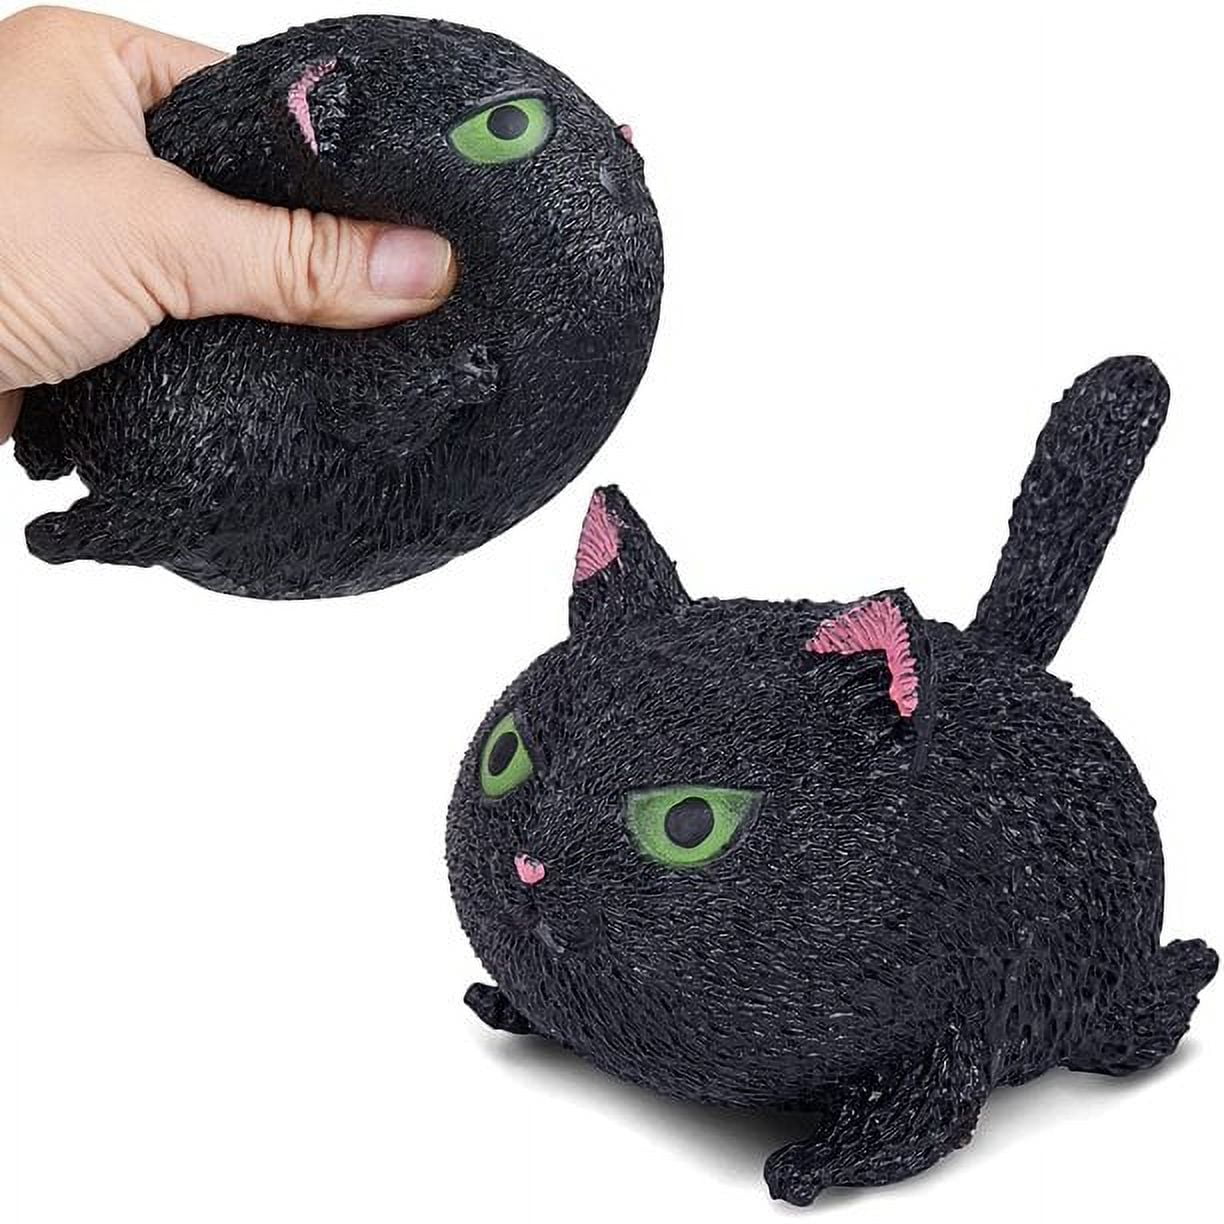 Pinch Angry Cat Cute Pet Toy Cat Shaped Squeeze Stress Relief Bola